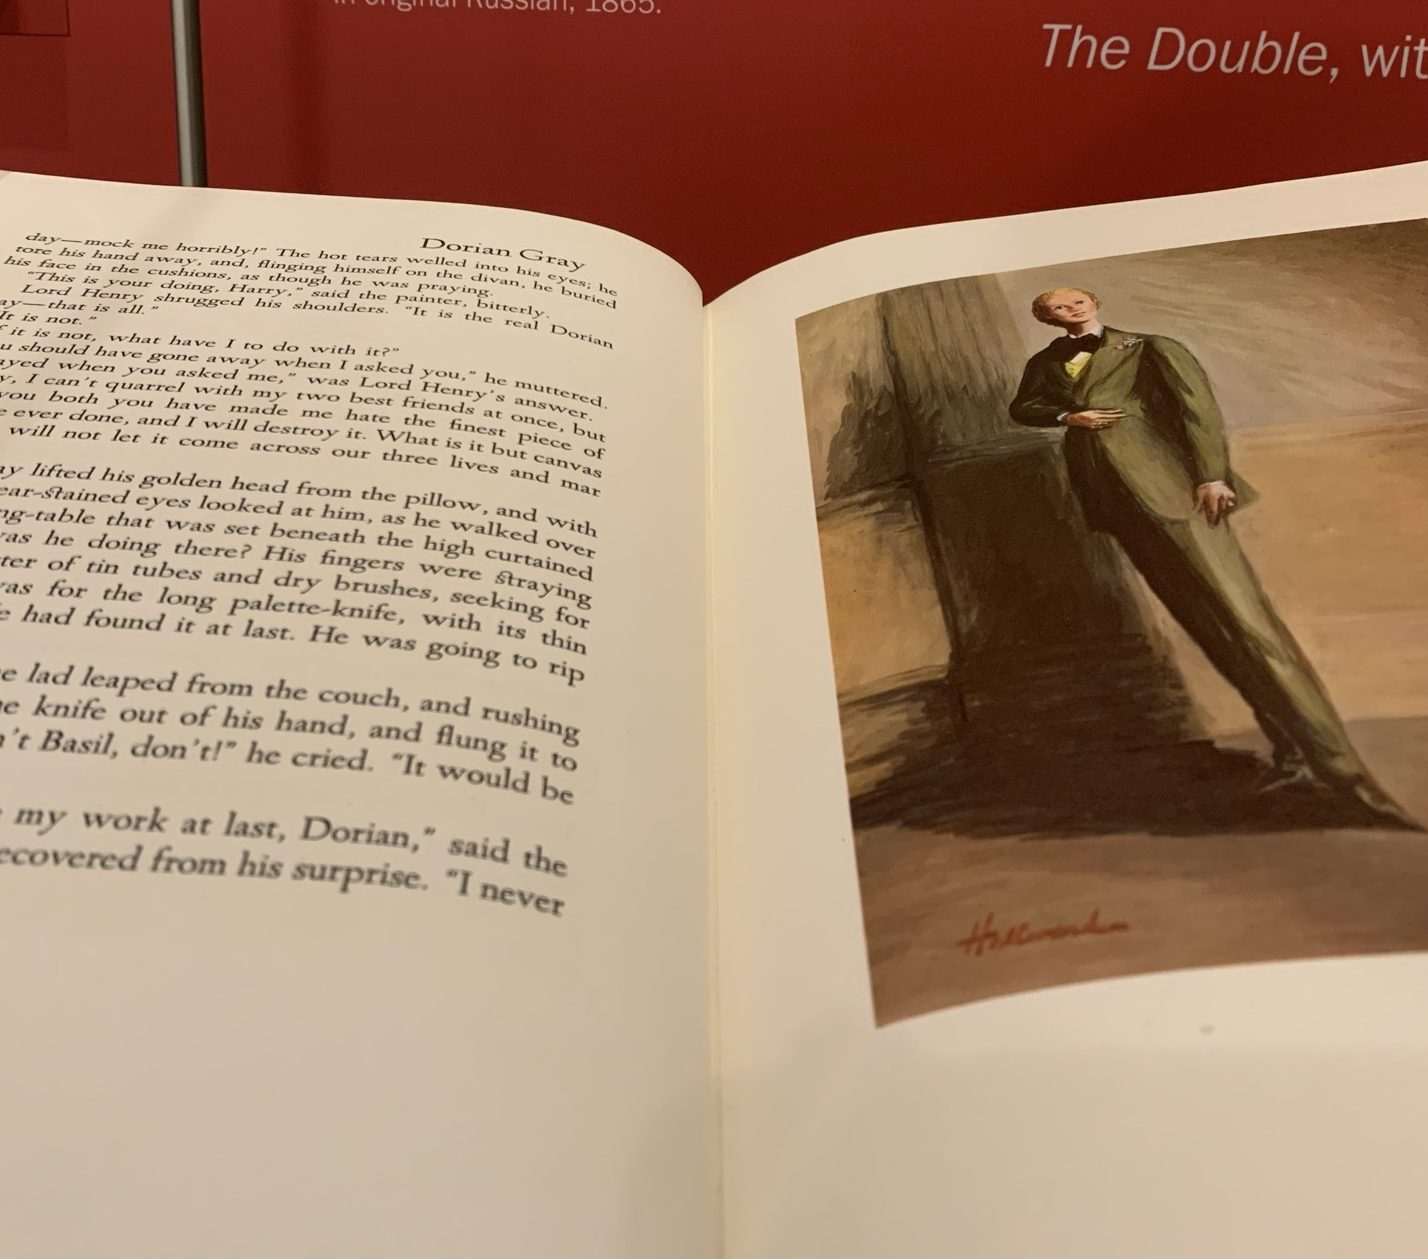 Oscar Wilde's novel The Picture of Dorian Gray is open to a portrait of Dorian Gray. He stands facing the reader. He wears a green suit and has a pleasant expression.